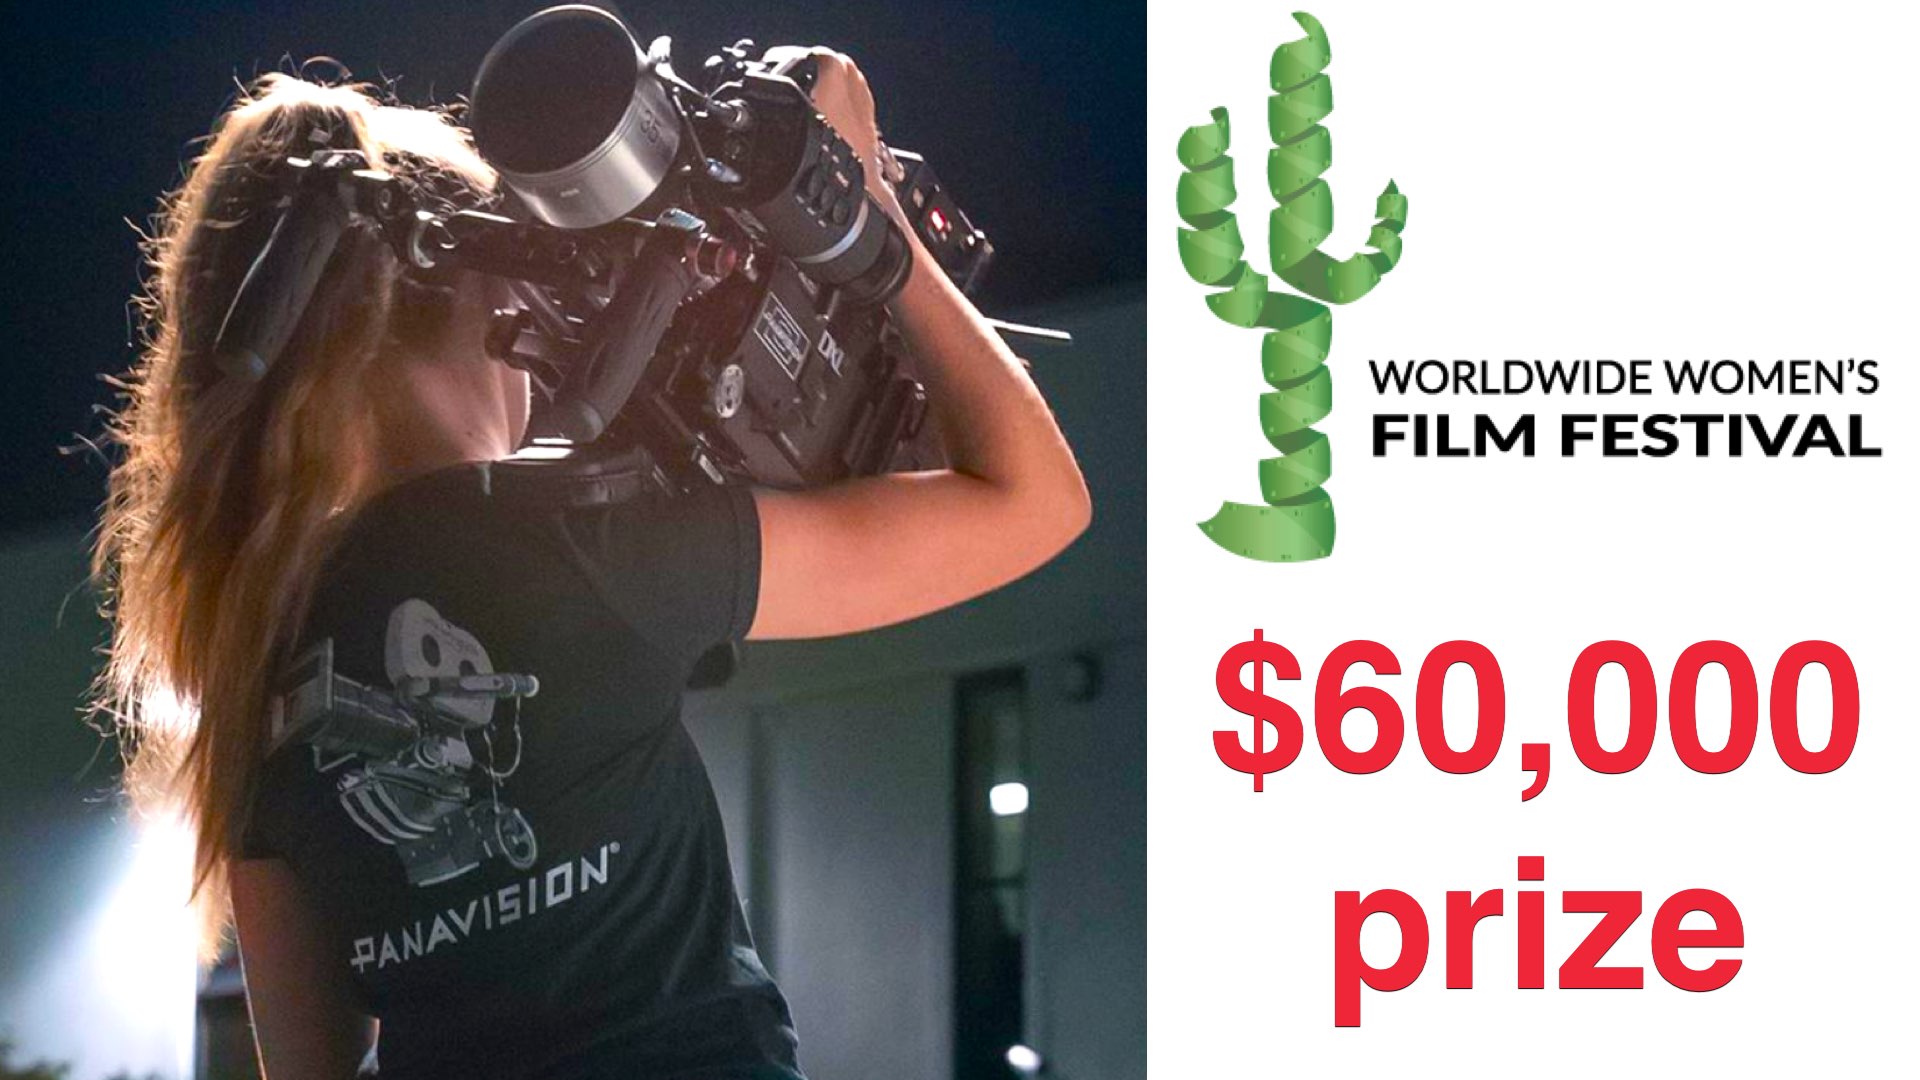 Panavision and Worldwide Women's Film Festival (WWFF) prize